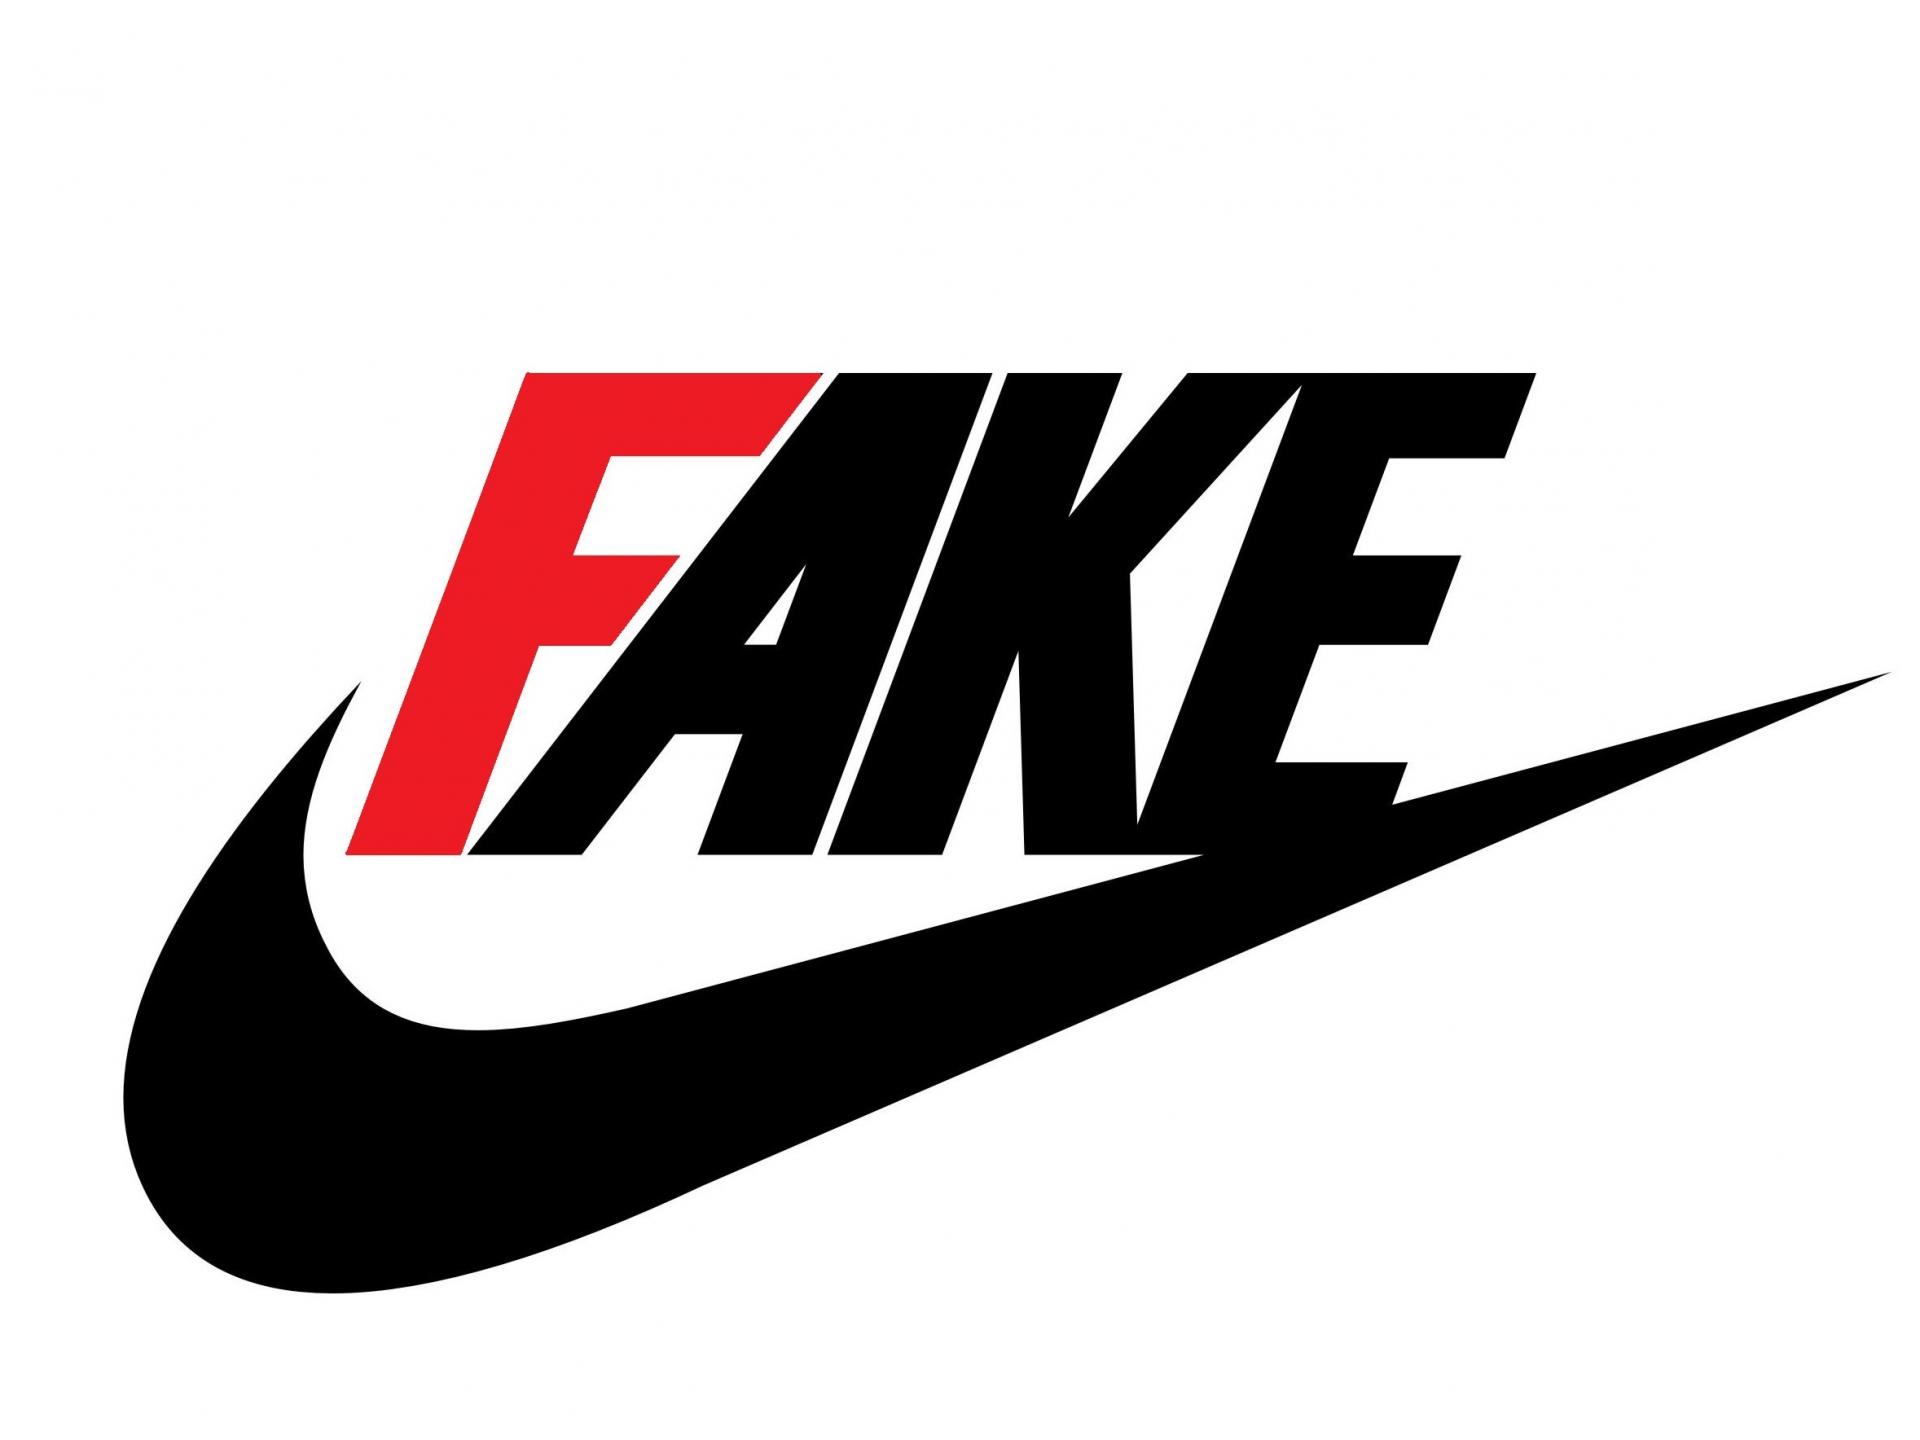 What are the most popularly searched fake labels and tech products on the  (black) market?